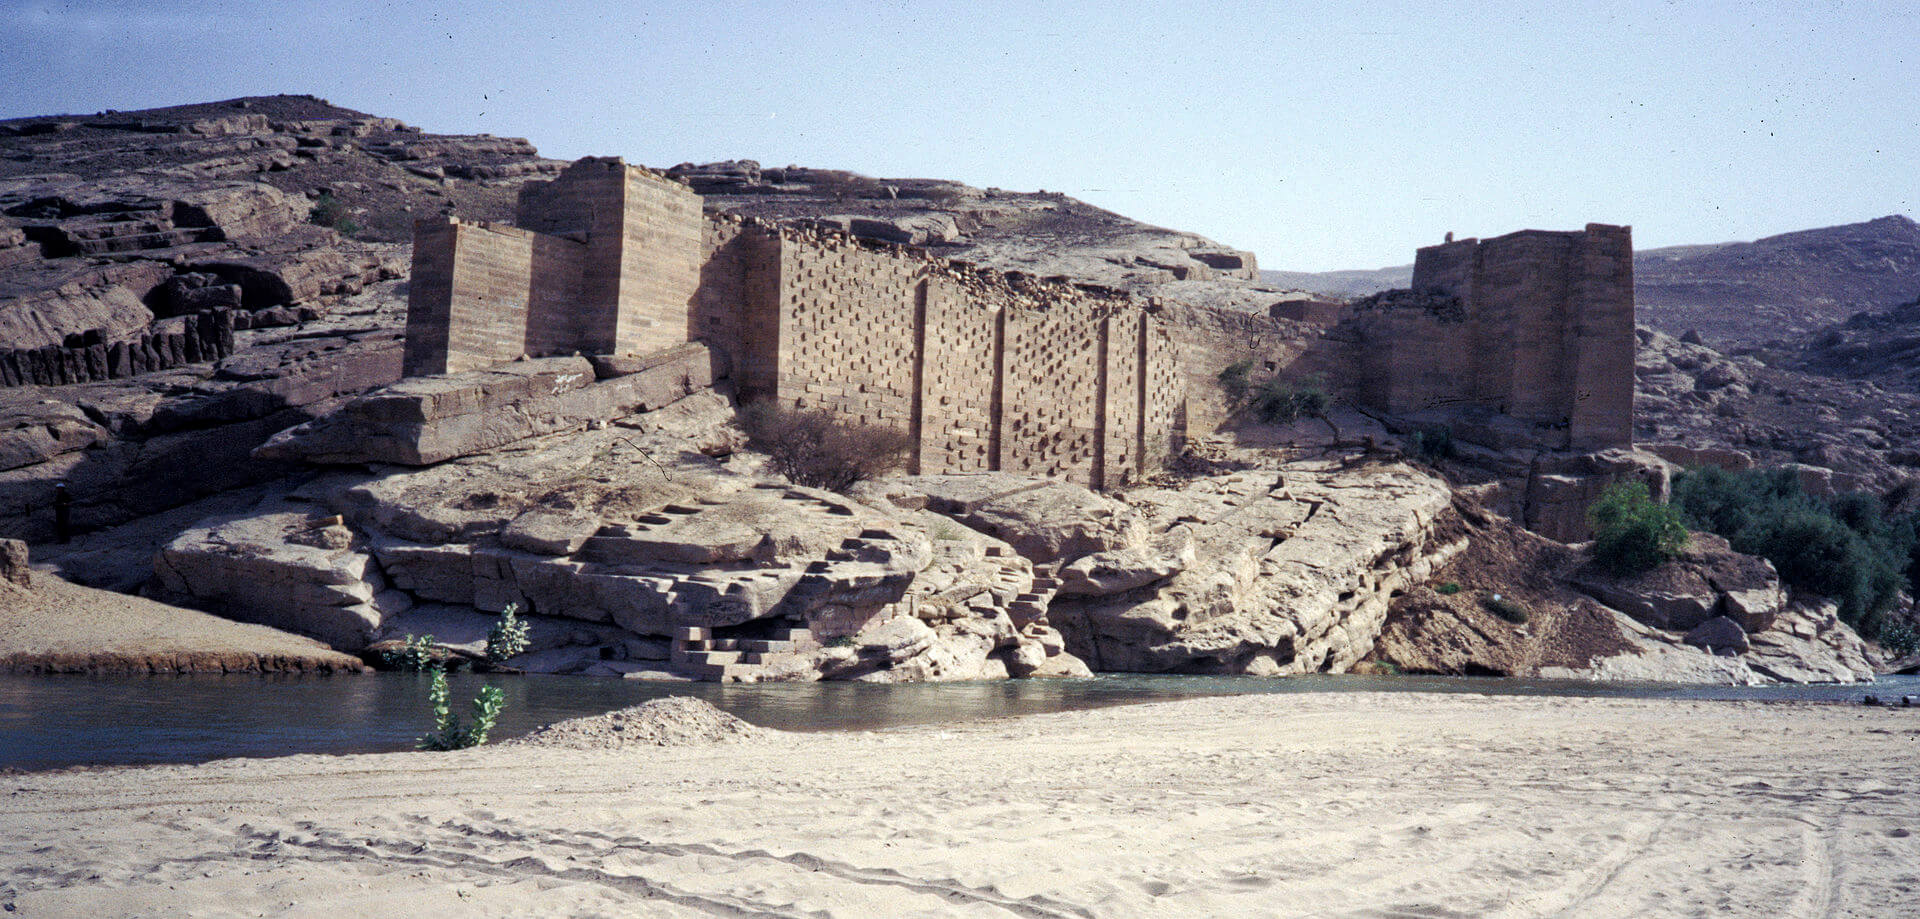 Ruins of the historical dam of the former Sabaean capital of Ma'rib, amidst the Sarawat Mountains of present-day Yemen